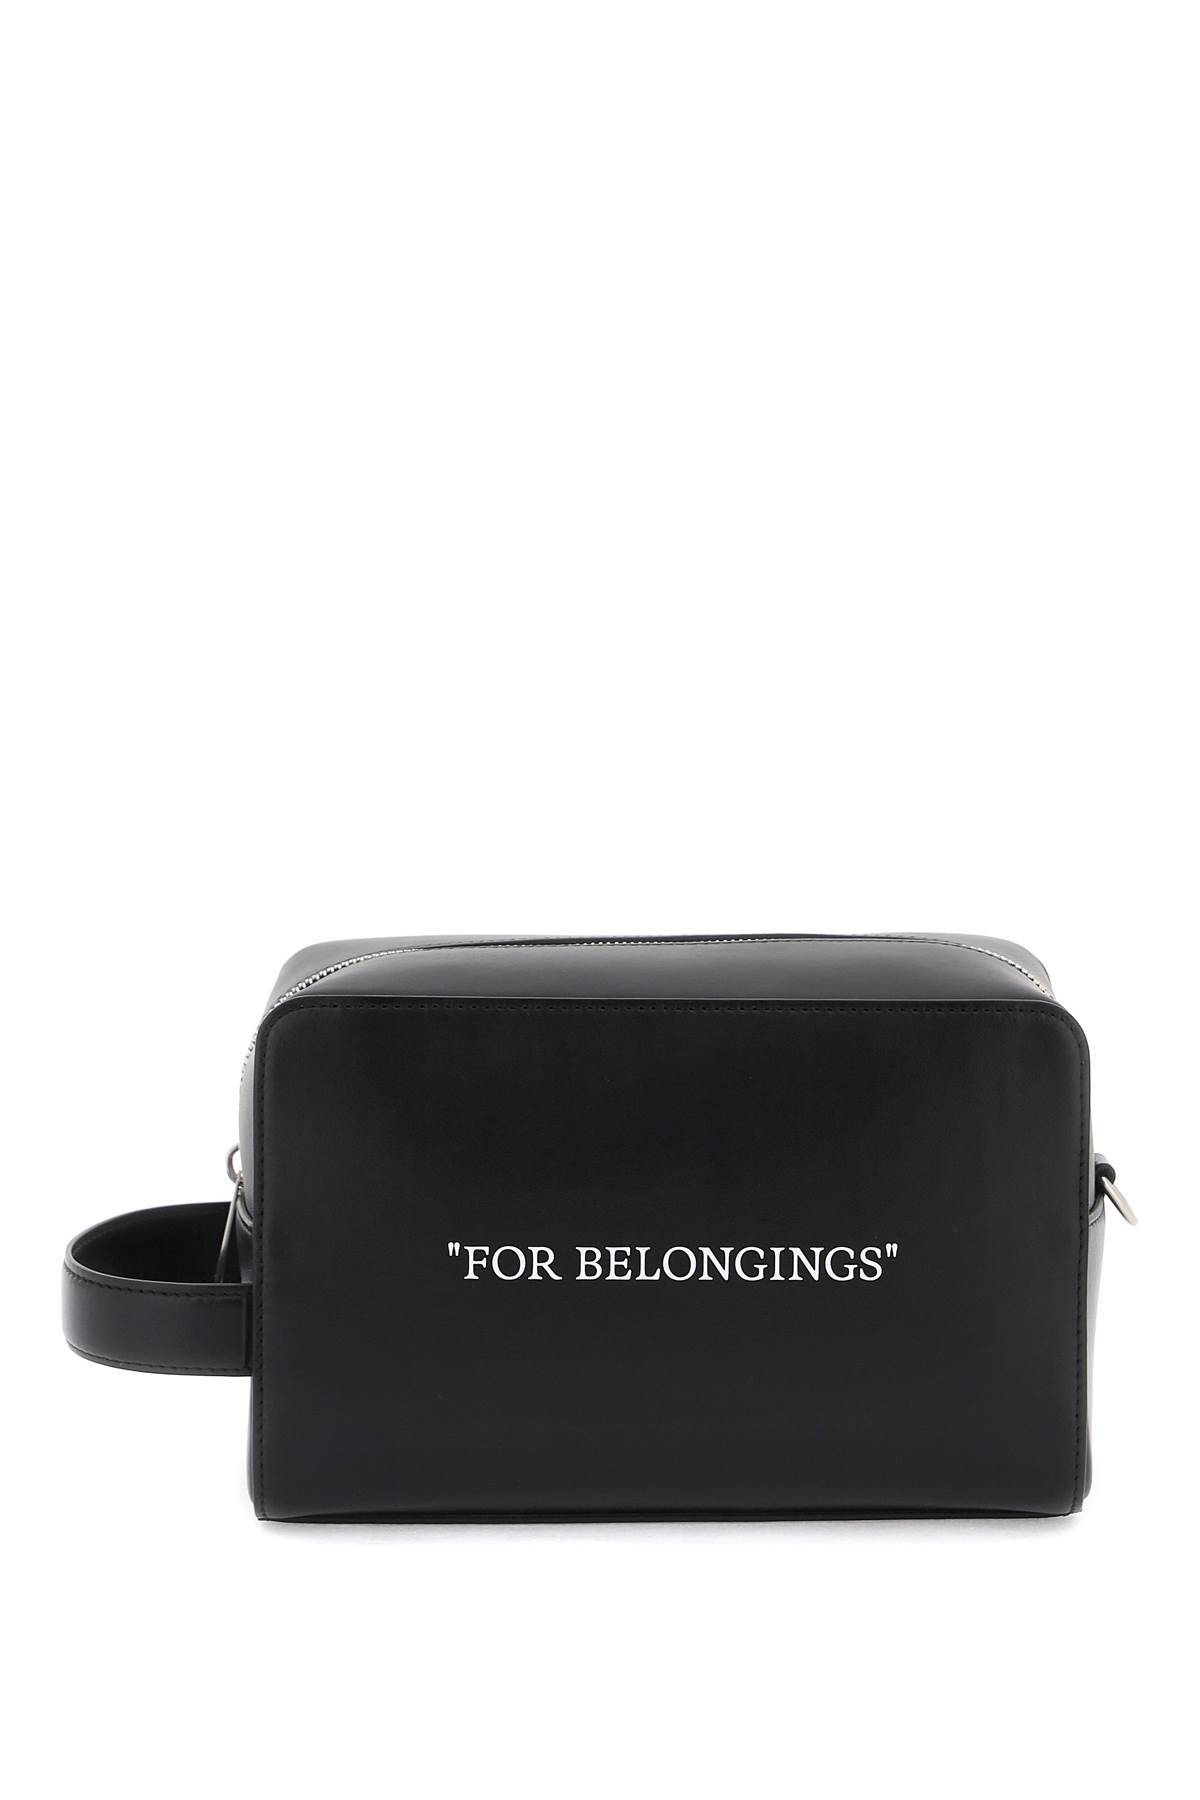 OFF-WHITE OFF-WHITE bookish vanity case